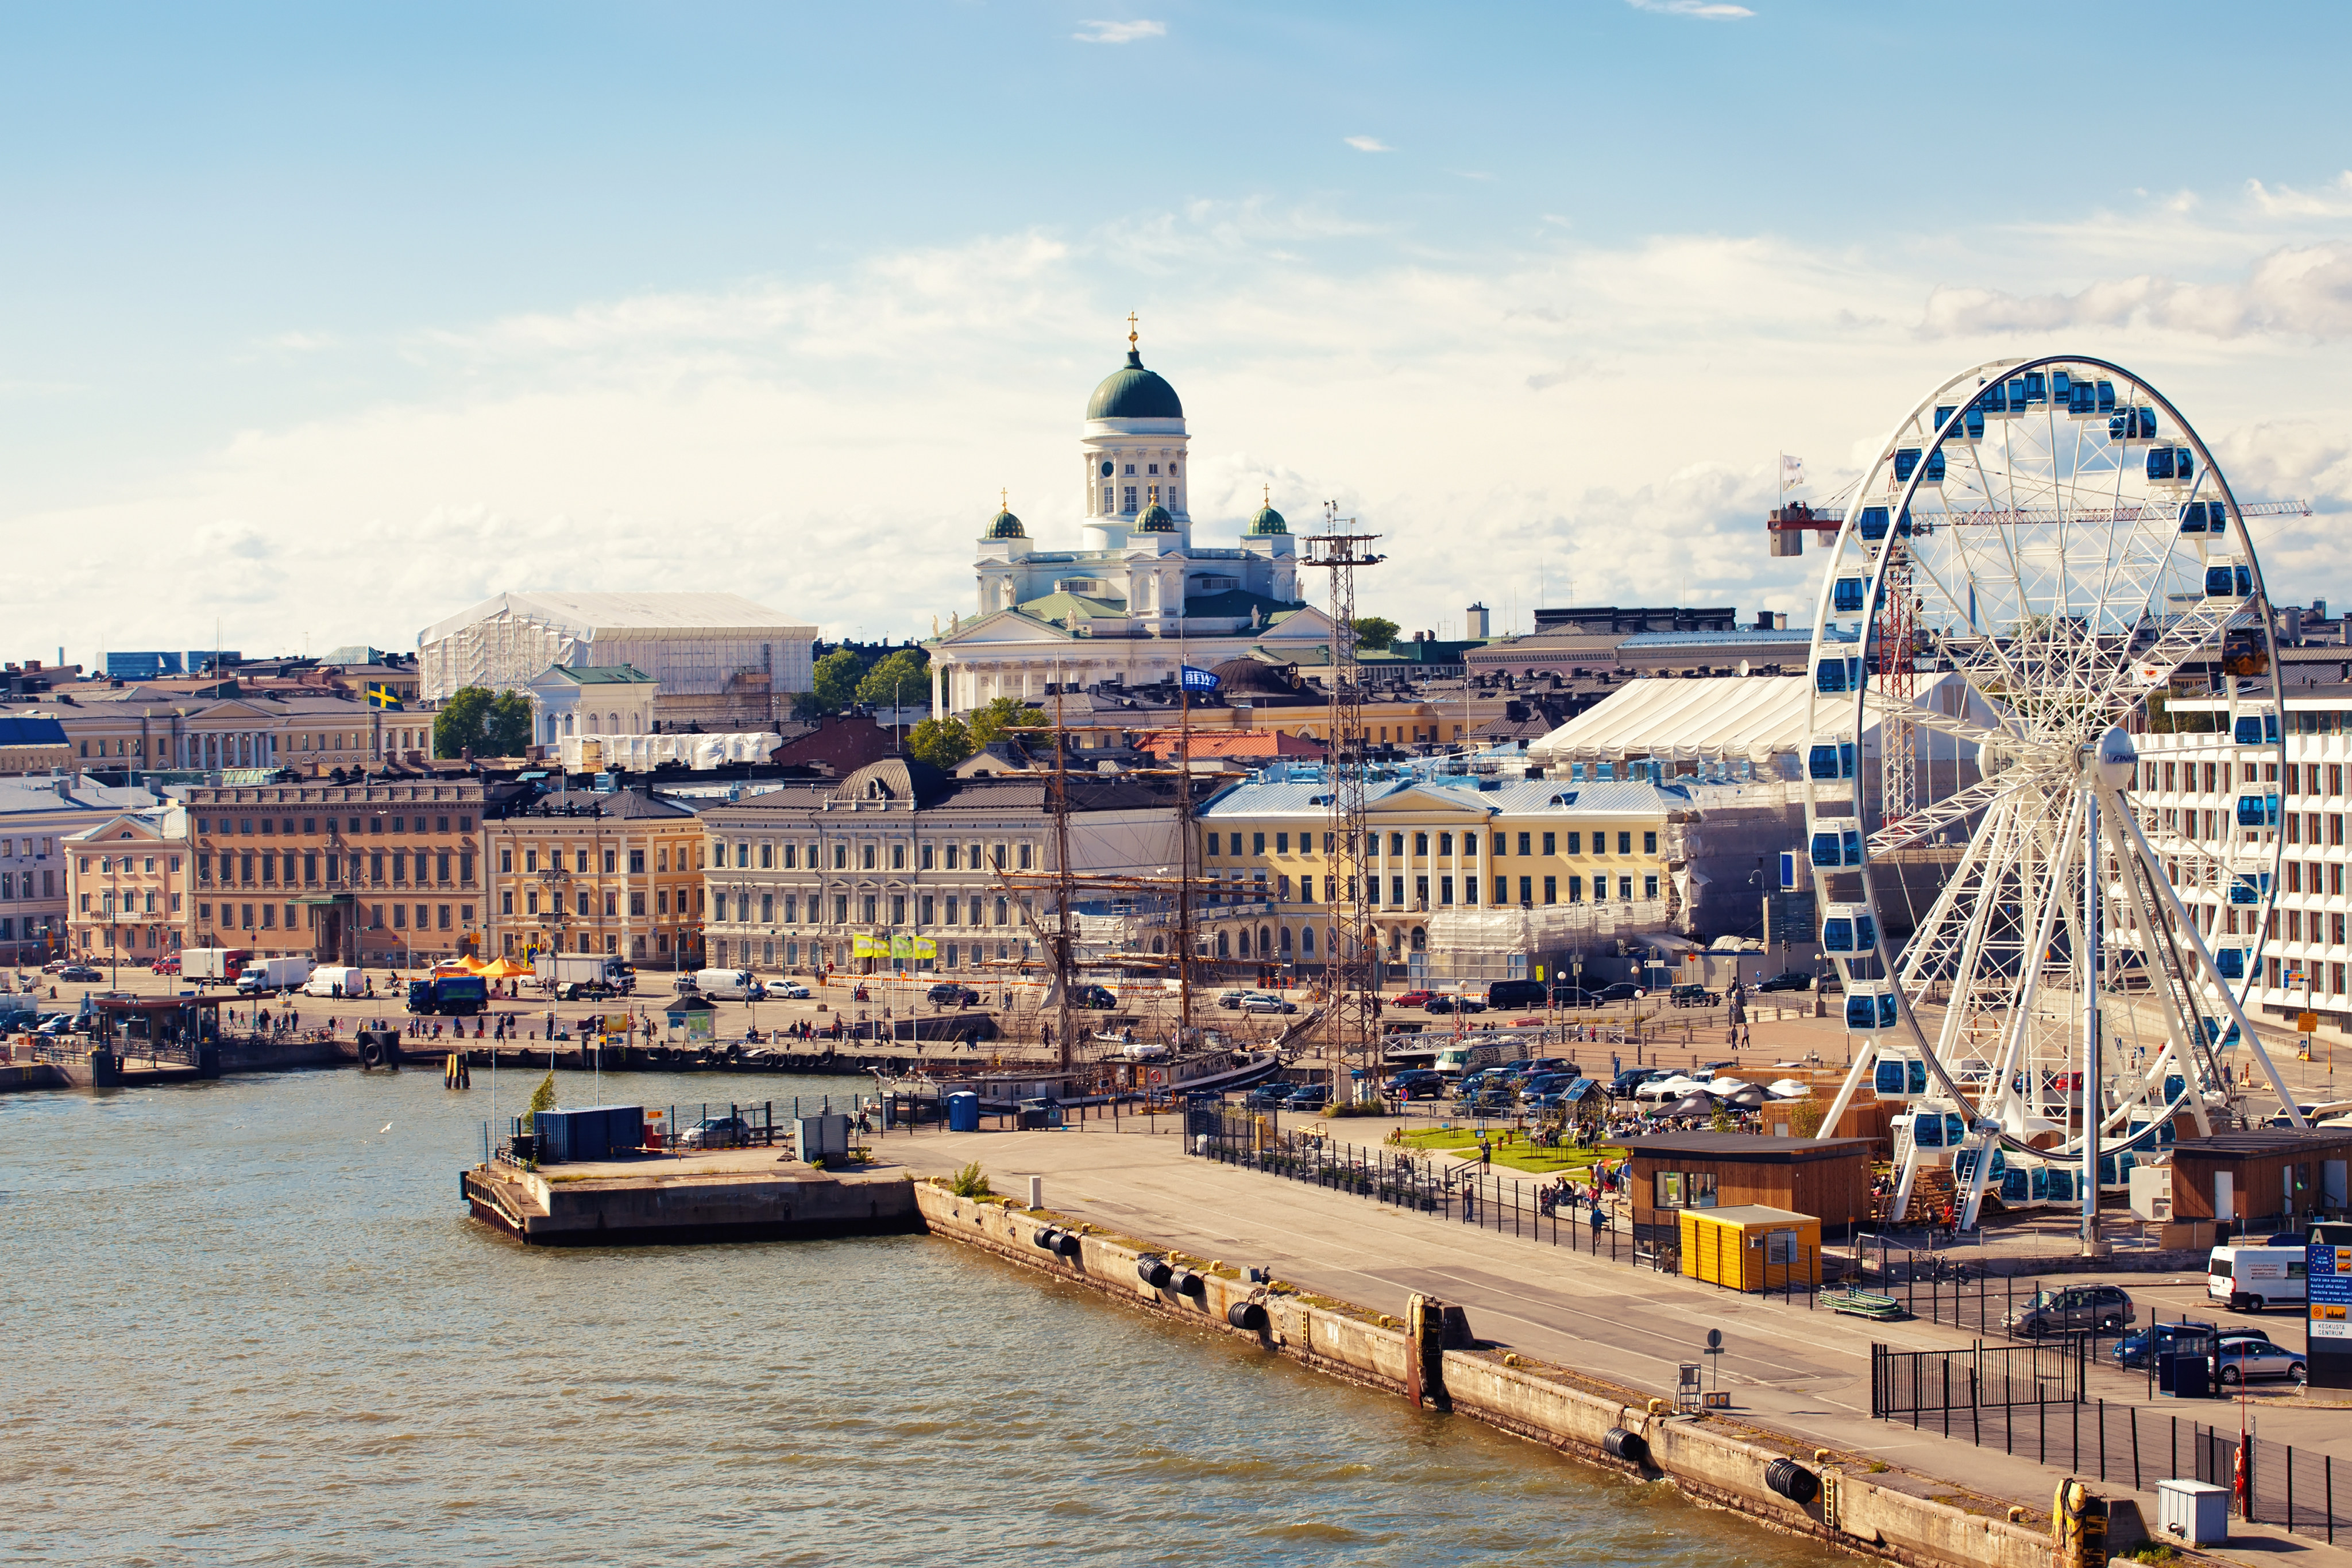 A plan to link Finland’s Helsinki, shown here, with Estonian capital city Tallinn has raised alarms in Baltic intelligence circles. Photo: Shutterstock